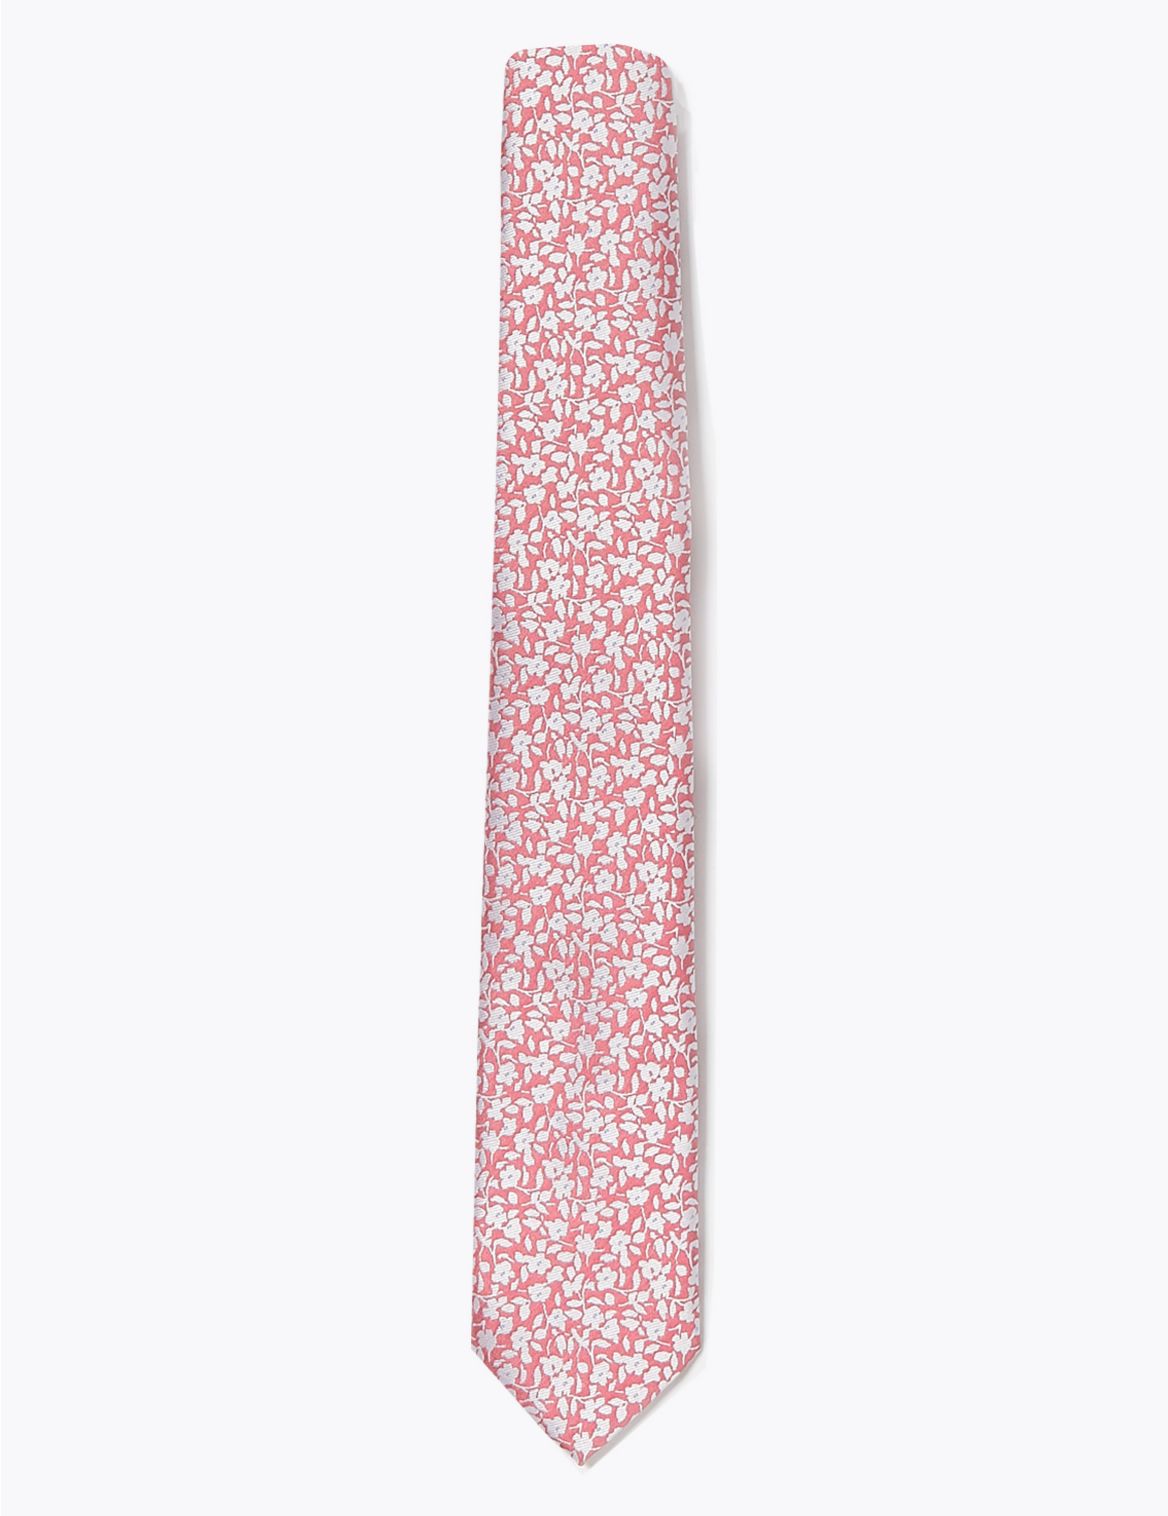 Skinny Woven Floral Tie pink